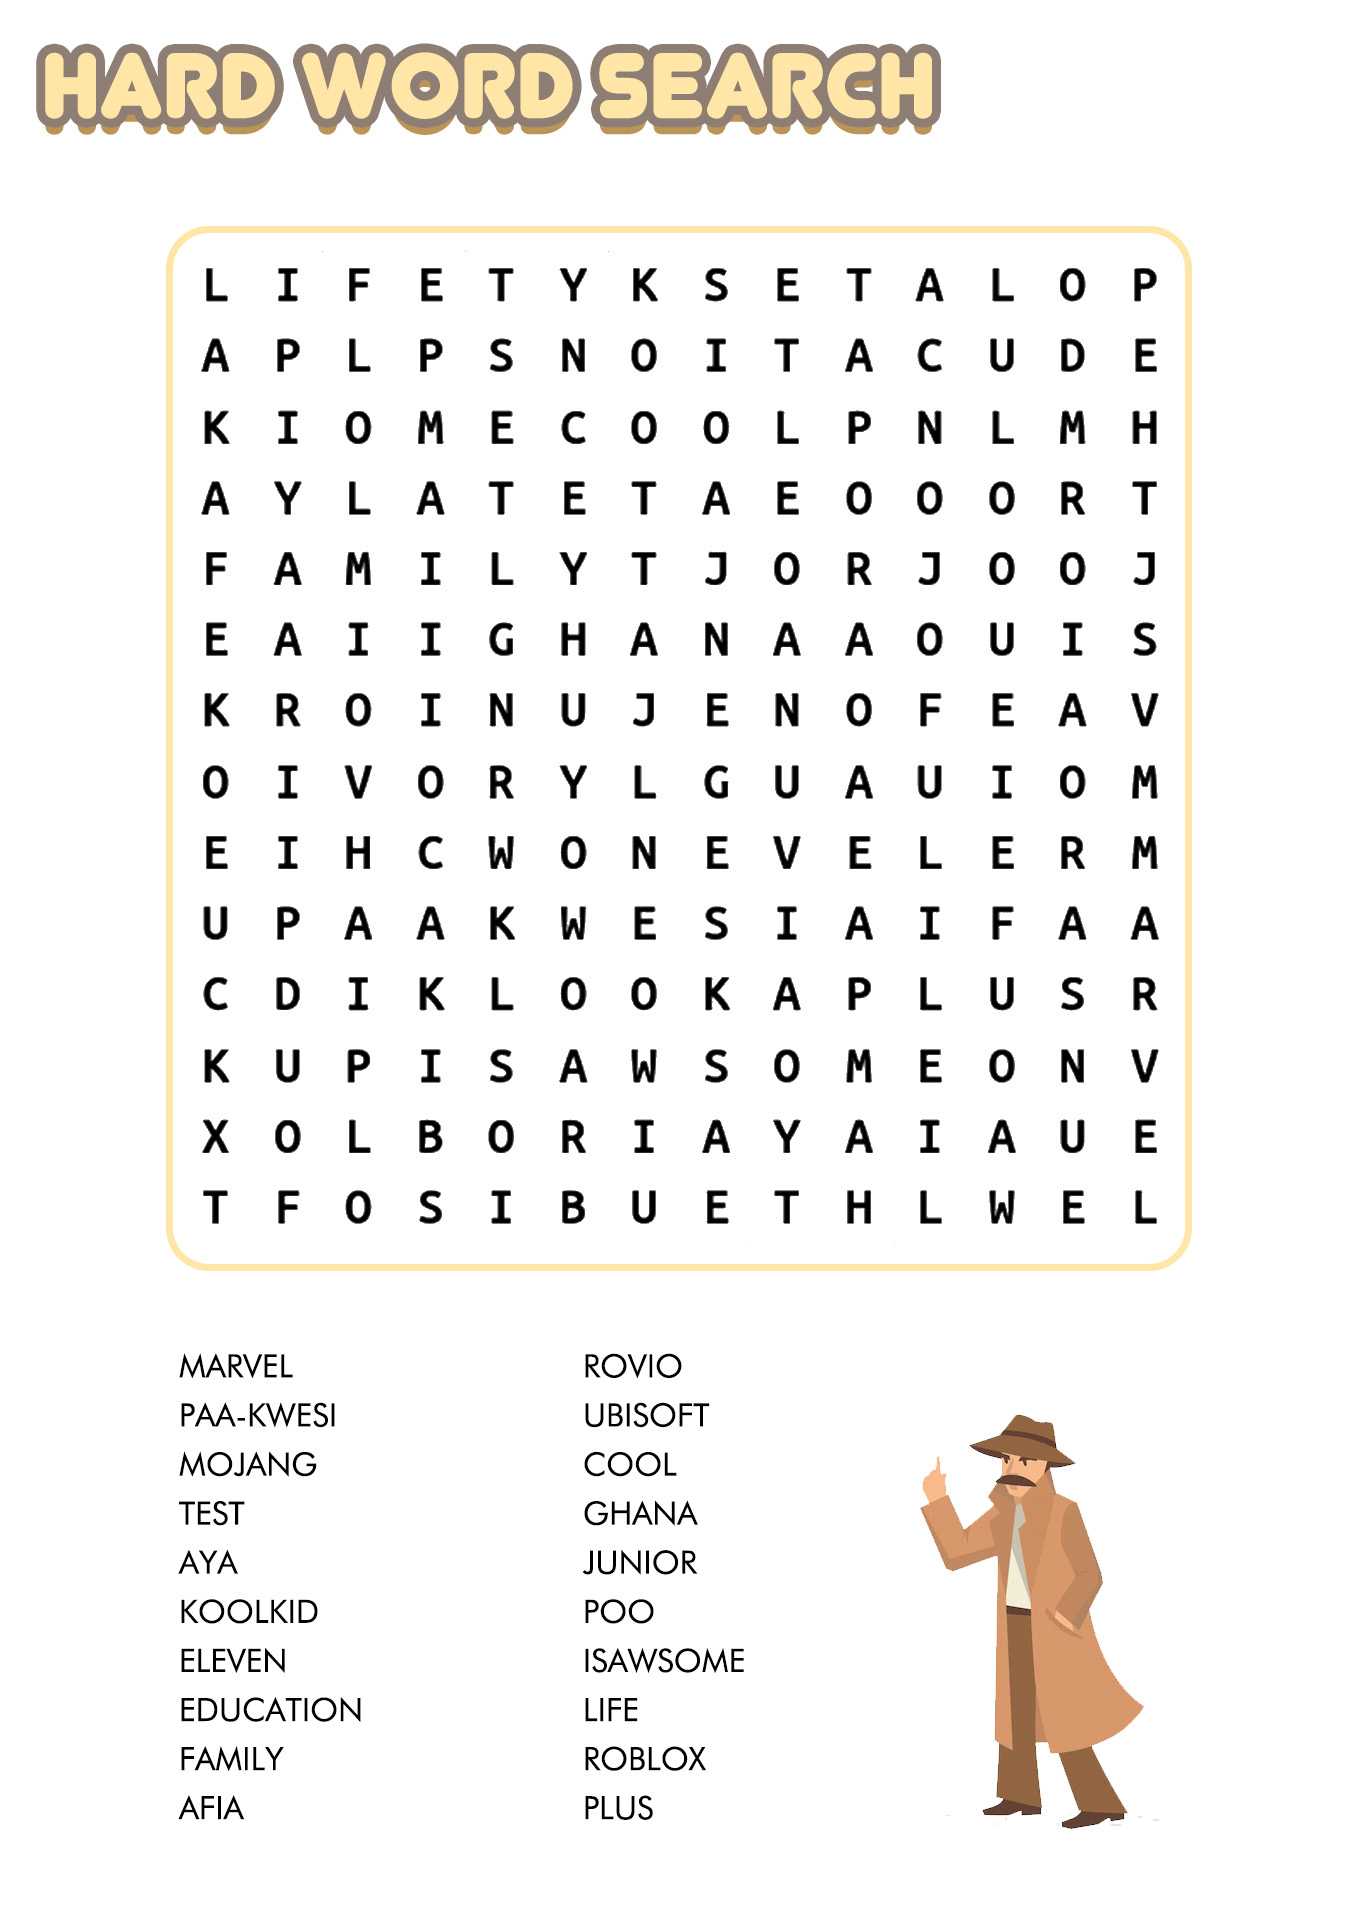 10 Best Images of Adult Word Search Puzzles Worksheets - Difficult